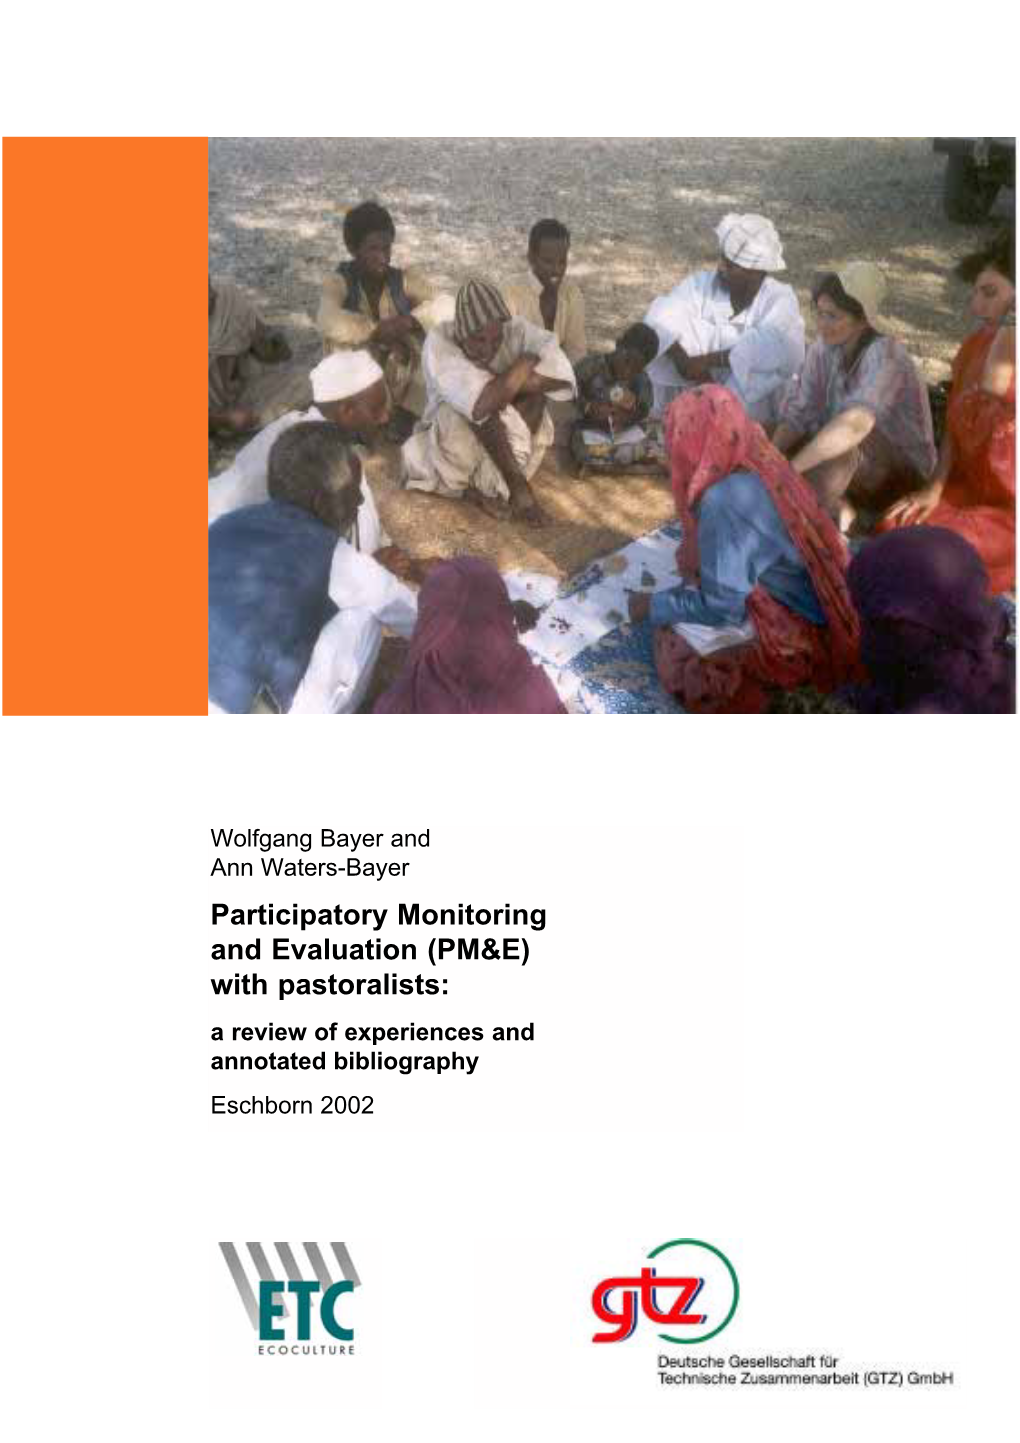 Participatory Monitoring and Evaluation (PM&E) with Pastoralists